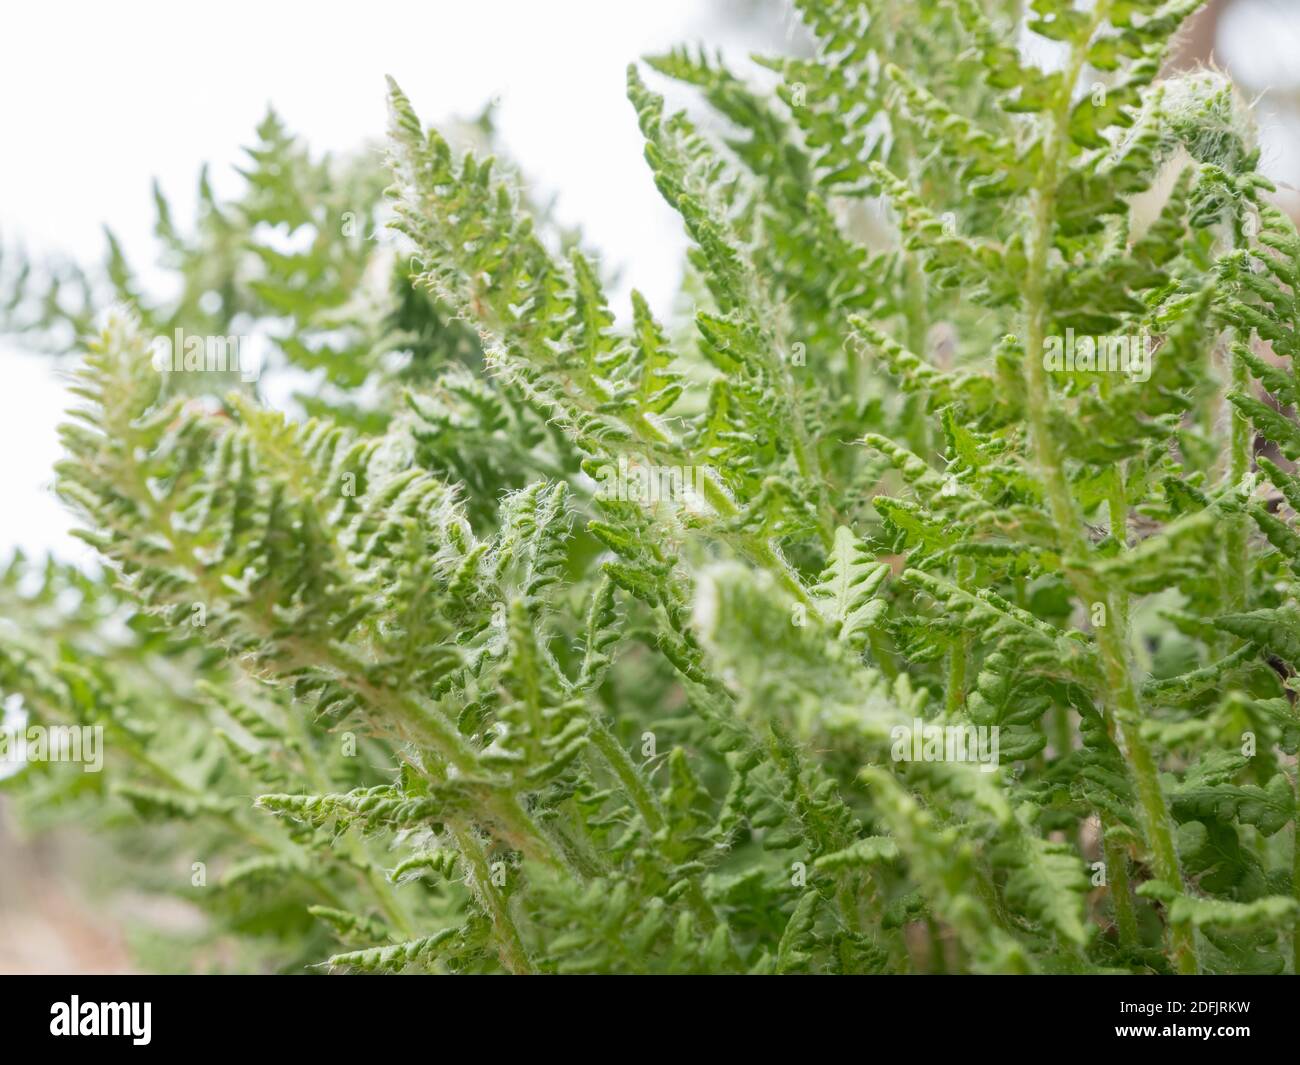 Oblong woodsia fern plant with hairy leaves Stock Photo